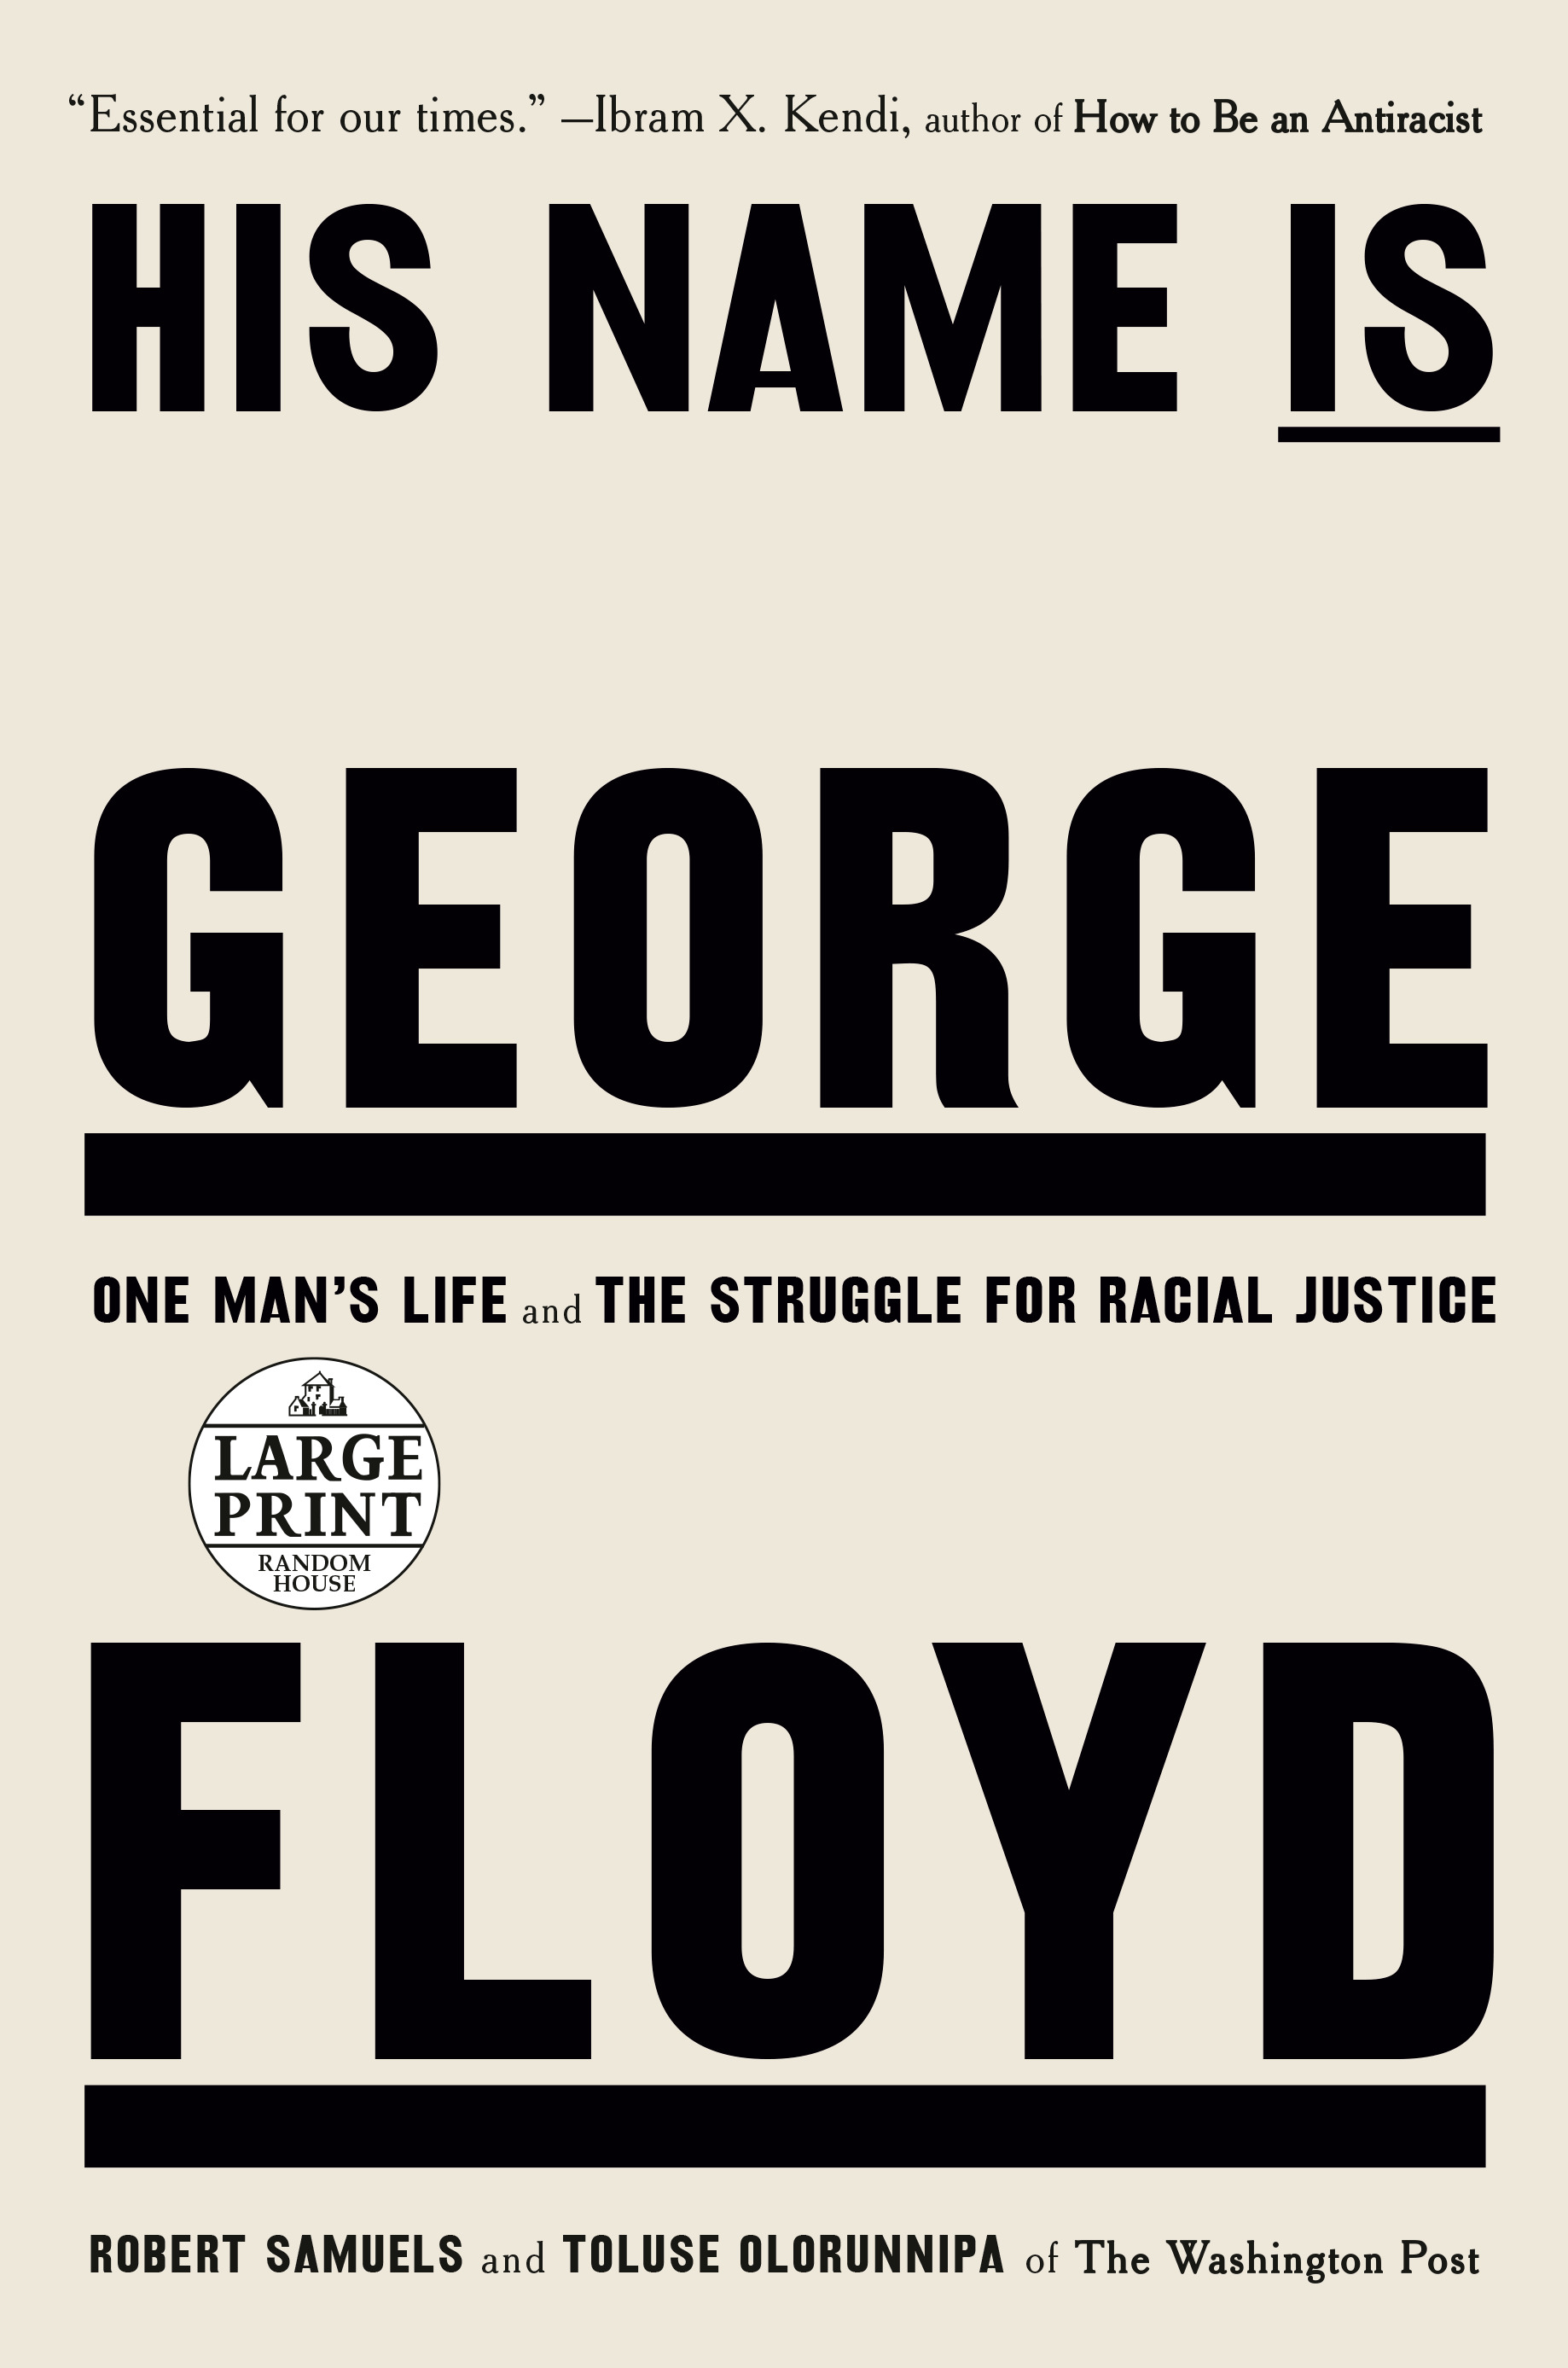 His Name Is George Floyd : One Man's Life and the Struggle for Racial Justice | Biography & Memoir